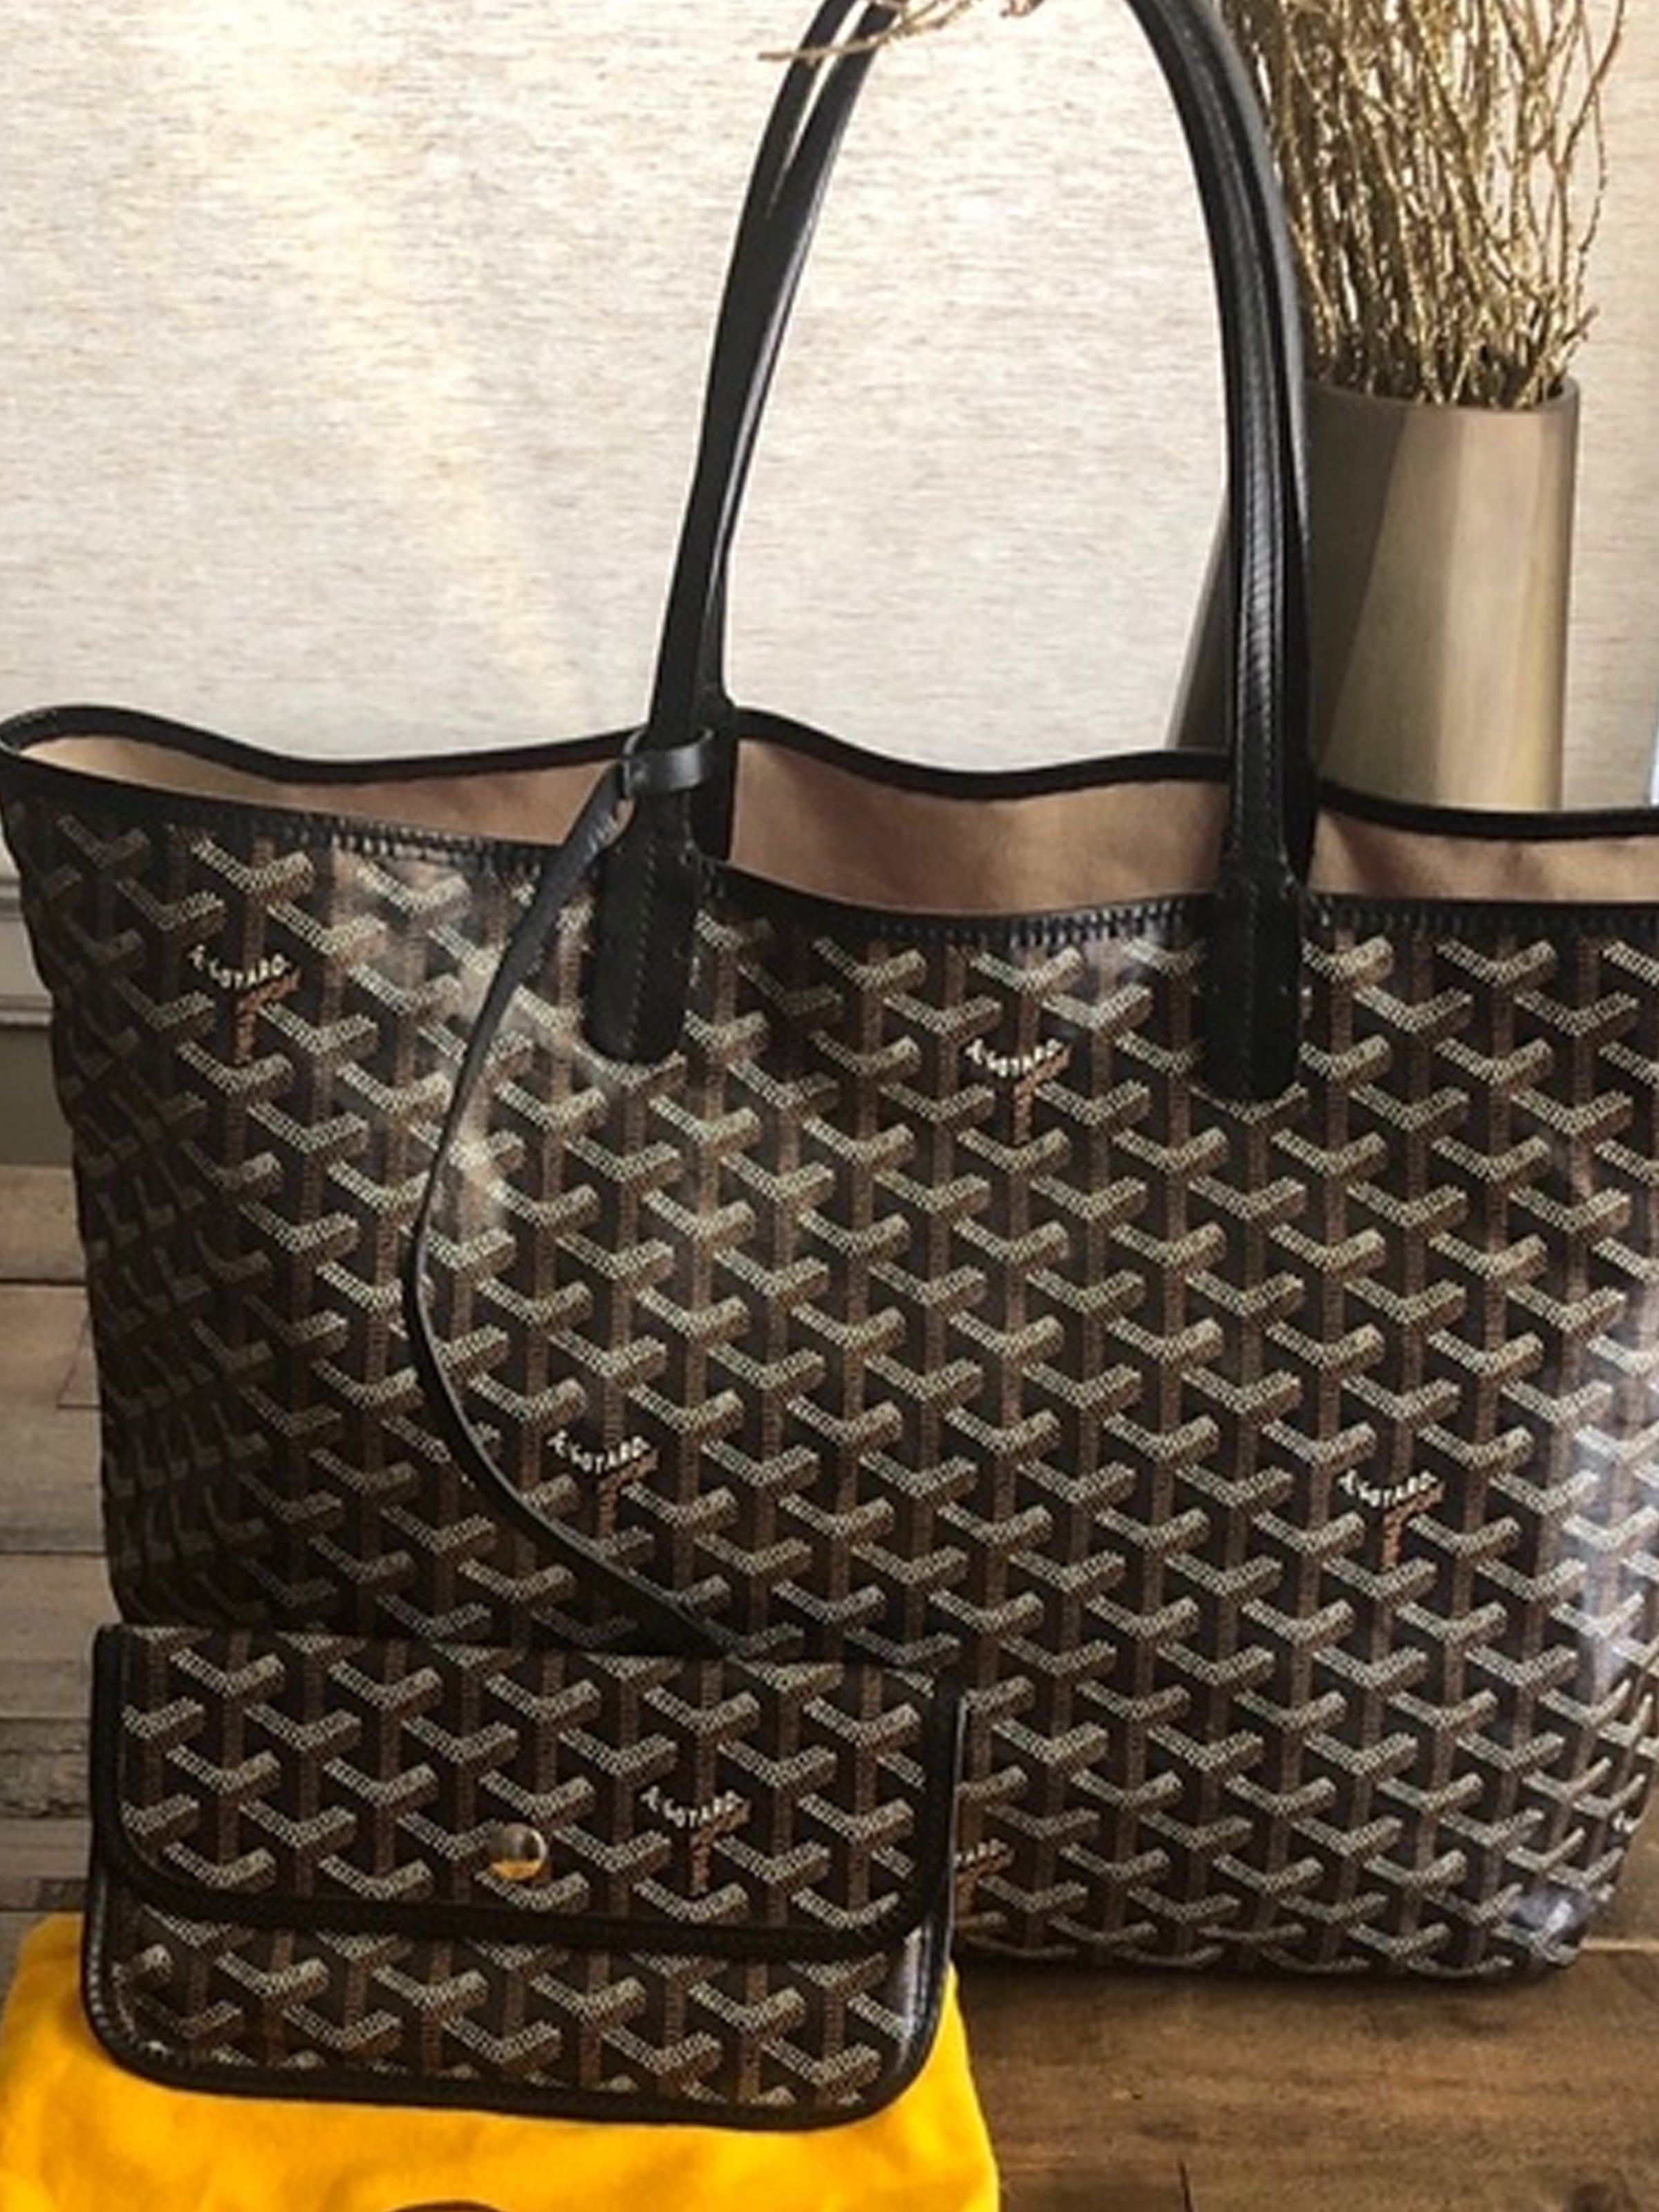 st louis tote black leather